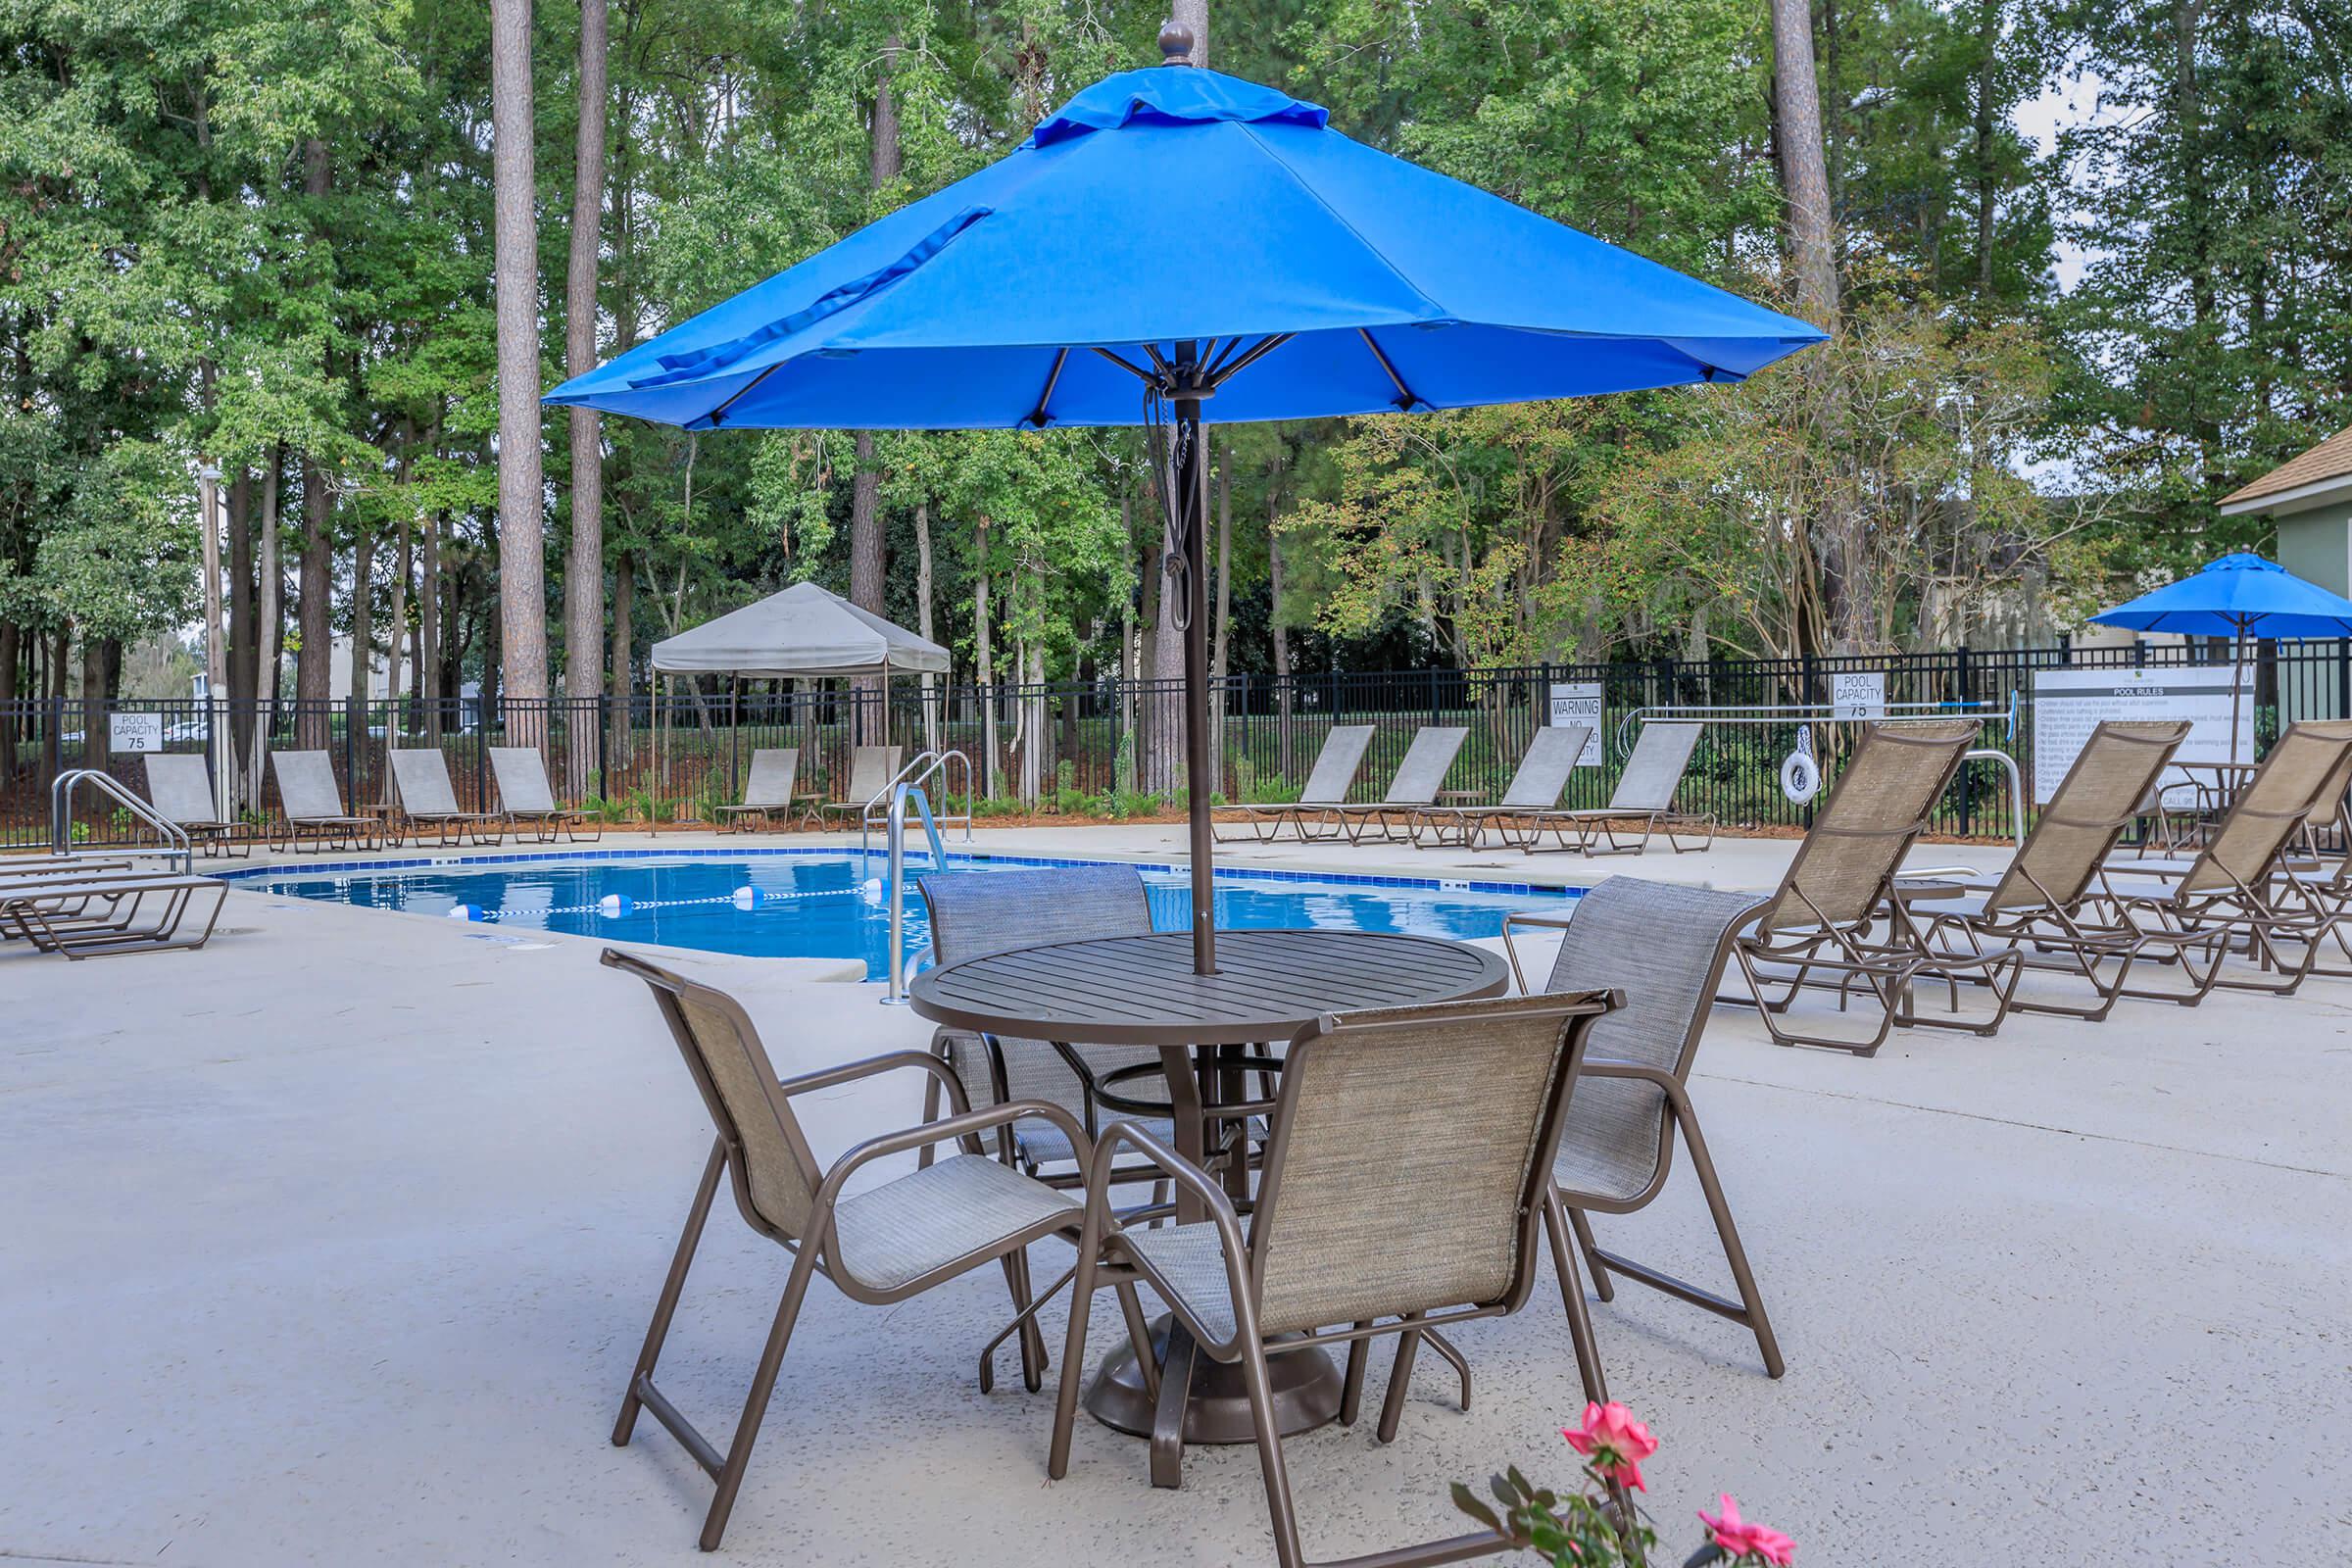 a group of lawn chairs sitting on a table with a blue umbrella